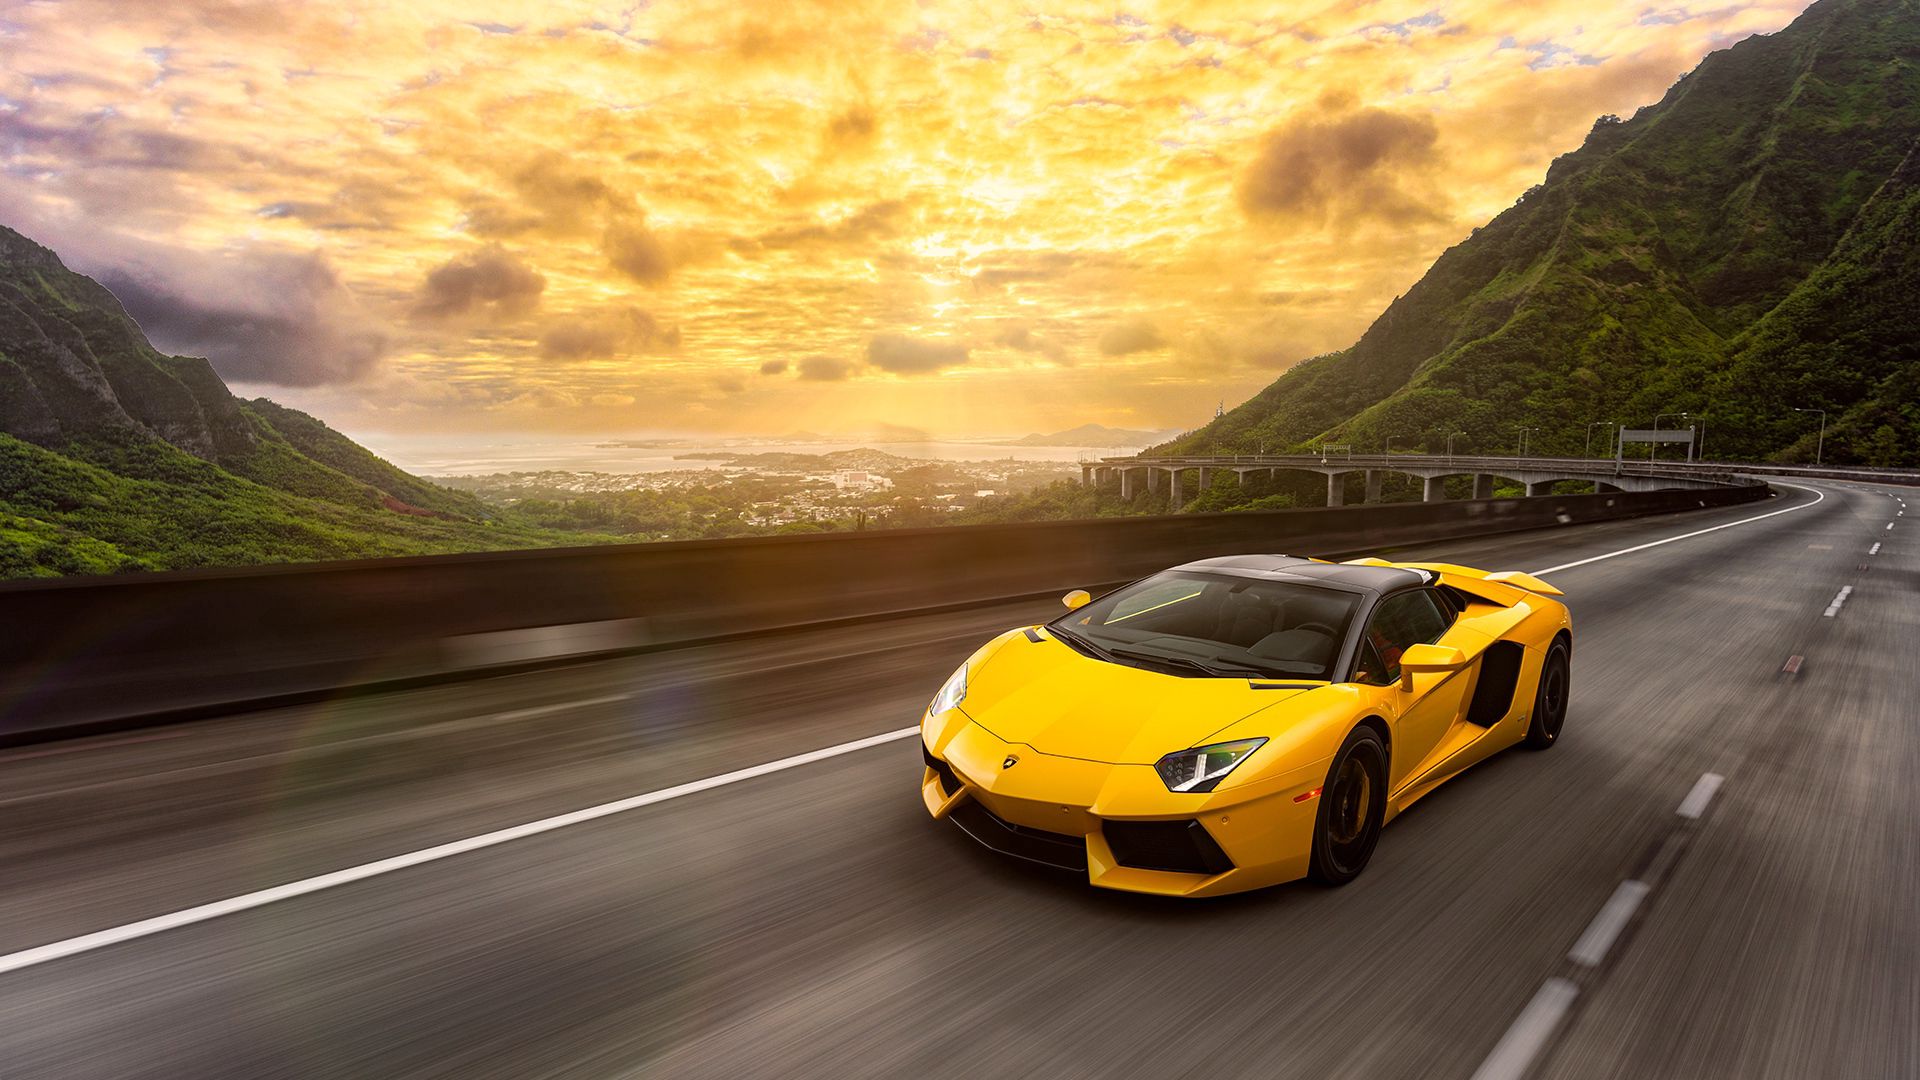 115767 free download Yellow wallpapers for phone, aventador, traffic, movement, cars Yellow images and screensavers for mobile